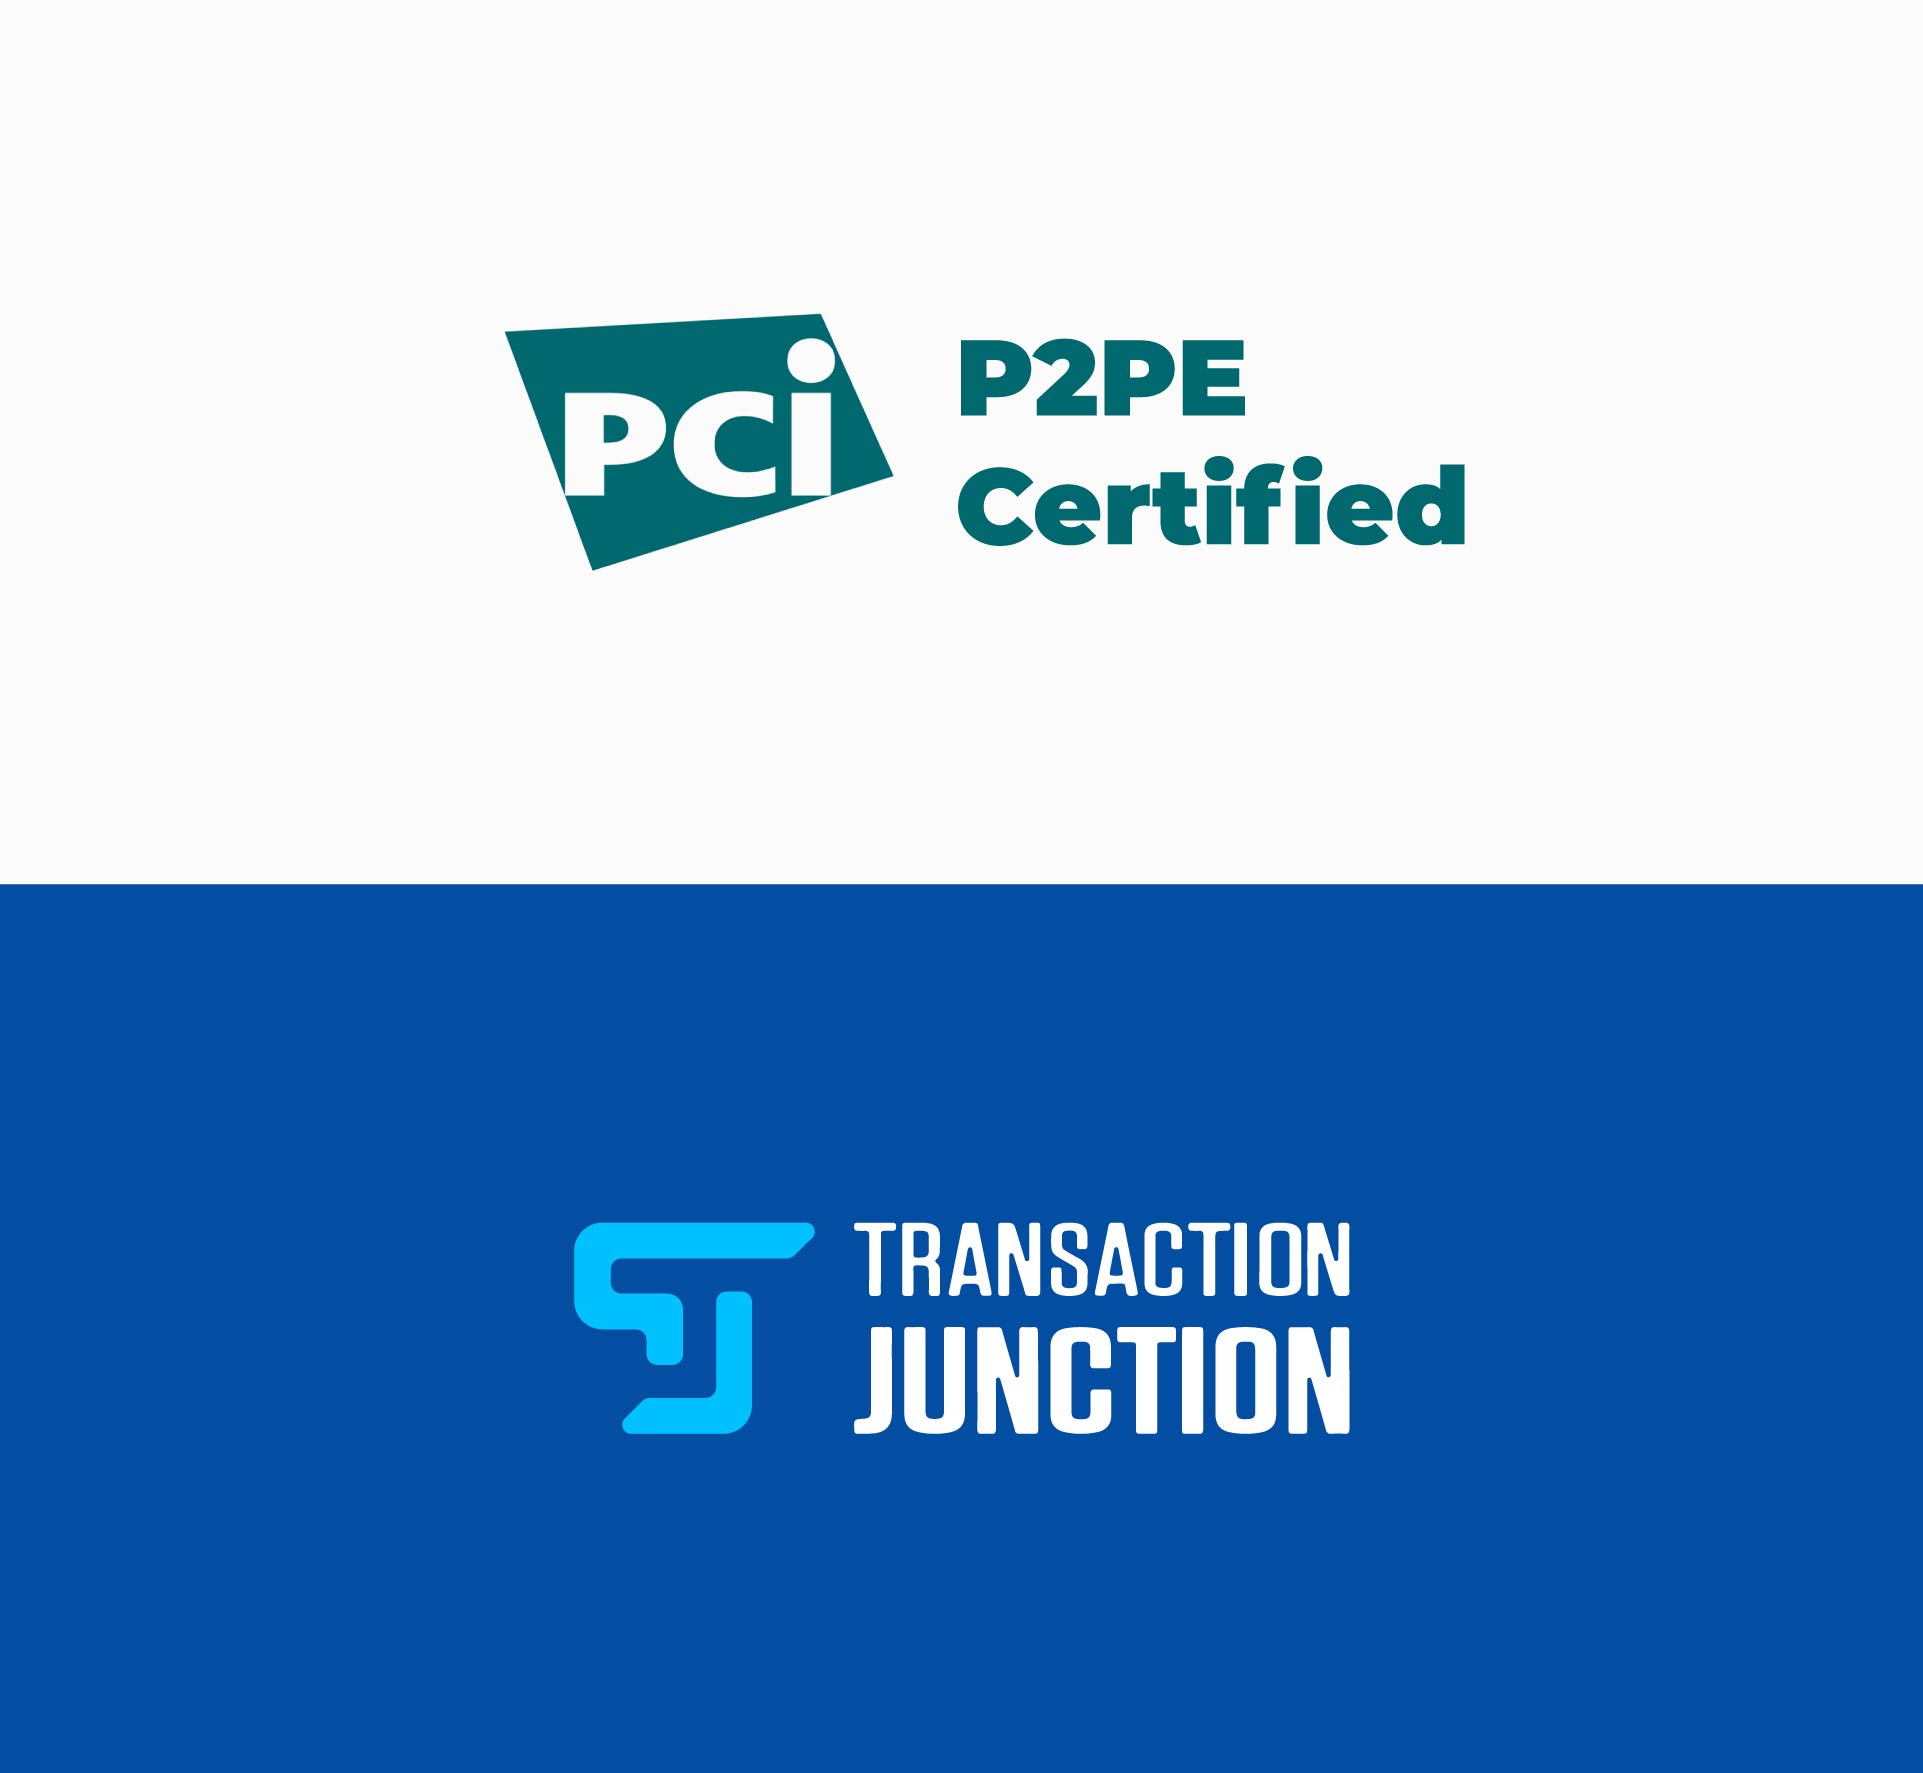 Ensuring Payment Security with a PCI P2PE Validated Platform